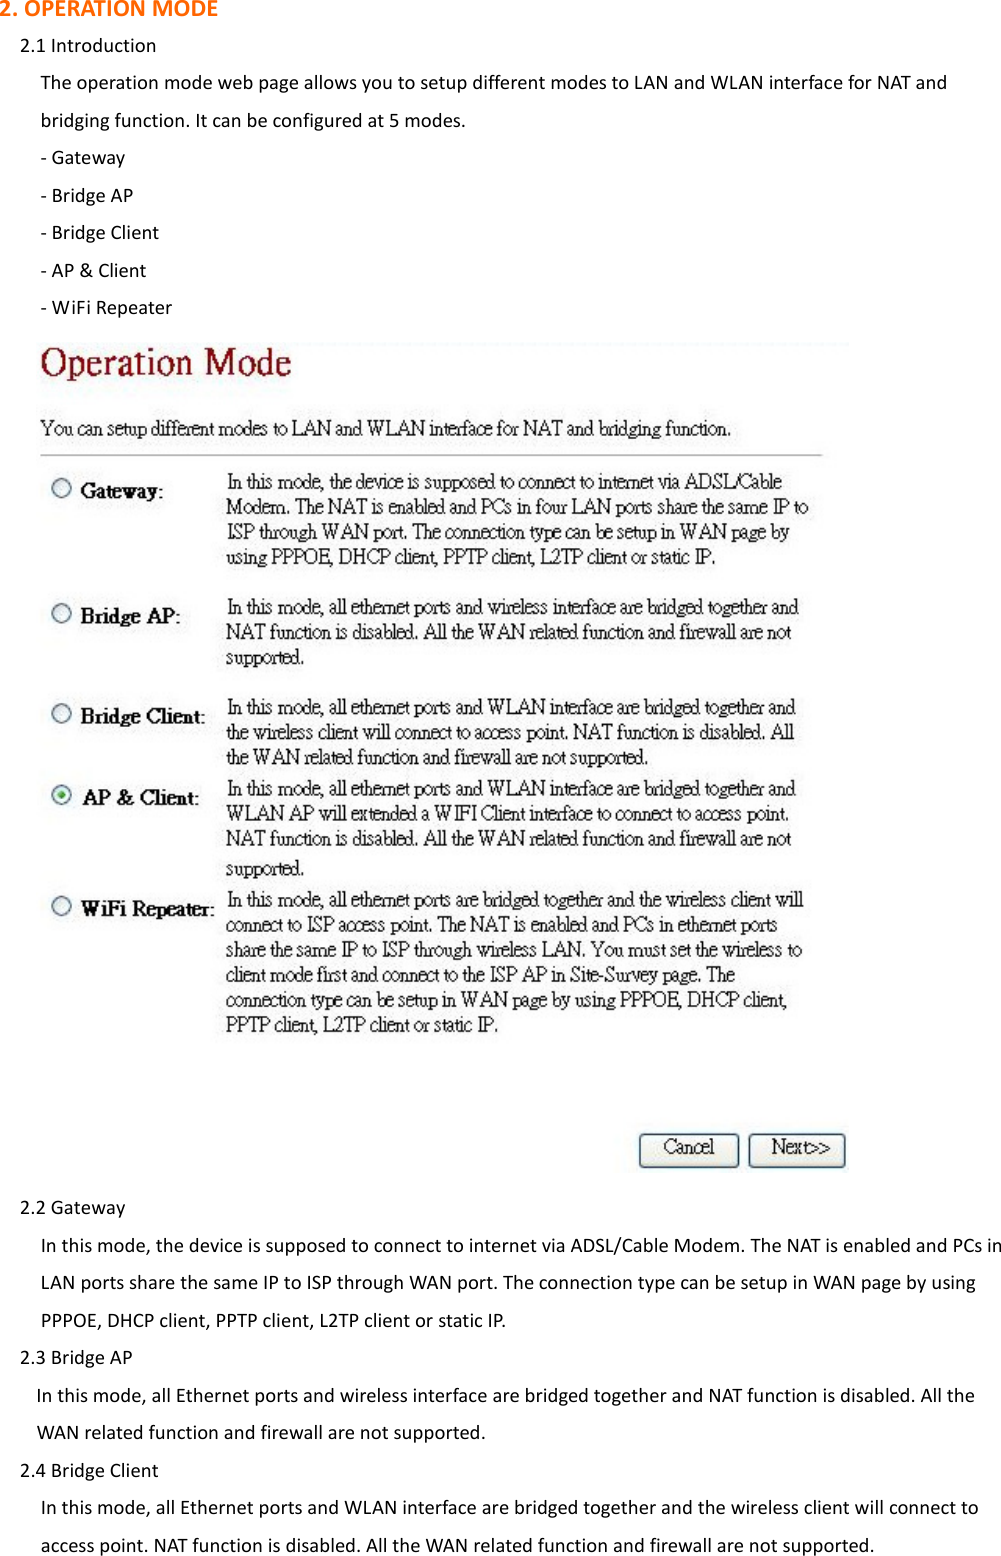 2. OPERATION MODE     2.1 Introduction The operation mode web page allows you to setup different modes to LAN and WLAN interface for NAT and bridging function. It can be configured at 5 modes. - Gateway - Bridge AP - Bridge Client - AP &amp; Client - WiFi Repeater      2.2 Gateway         In this mode, the device is supposed to connect to internet via ADSL/Cable Modem. The NAT is enabled and PCs in LAN ports share the same IP to ISP through WAN port. The connection type can be setup in WAN page by using PPPOE, DHCP client, PPTP client, L2TP client or static IP.     2.3 Bridge AP    In this mode, all Ethernet ports and wireless interface are bridged together and NAT function is disabled. All the WAN related function and firewall are not supported.     2.4 Bridge Client In this mode, all Ethernet ports and WLAN interface are bridged together and the wireless client will connect to access point. NAT function is disabled. All the WAN related function and firewall are not supported. 